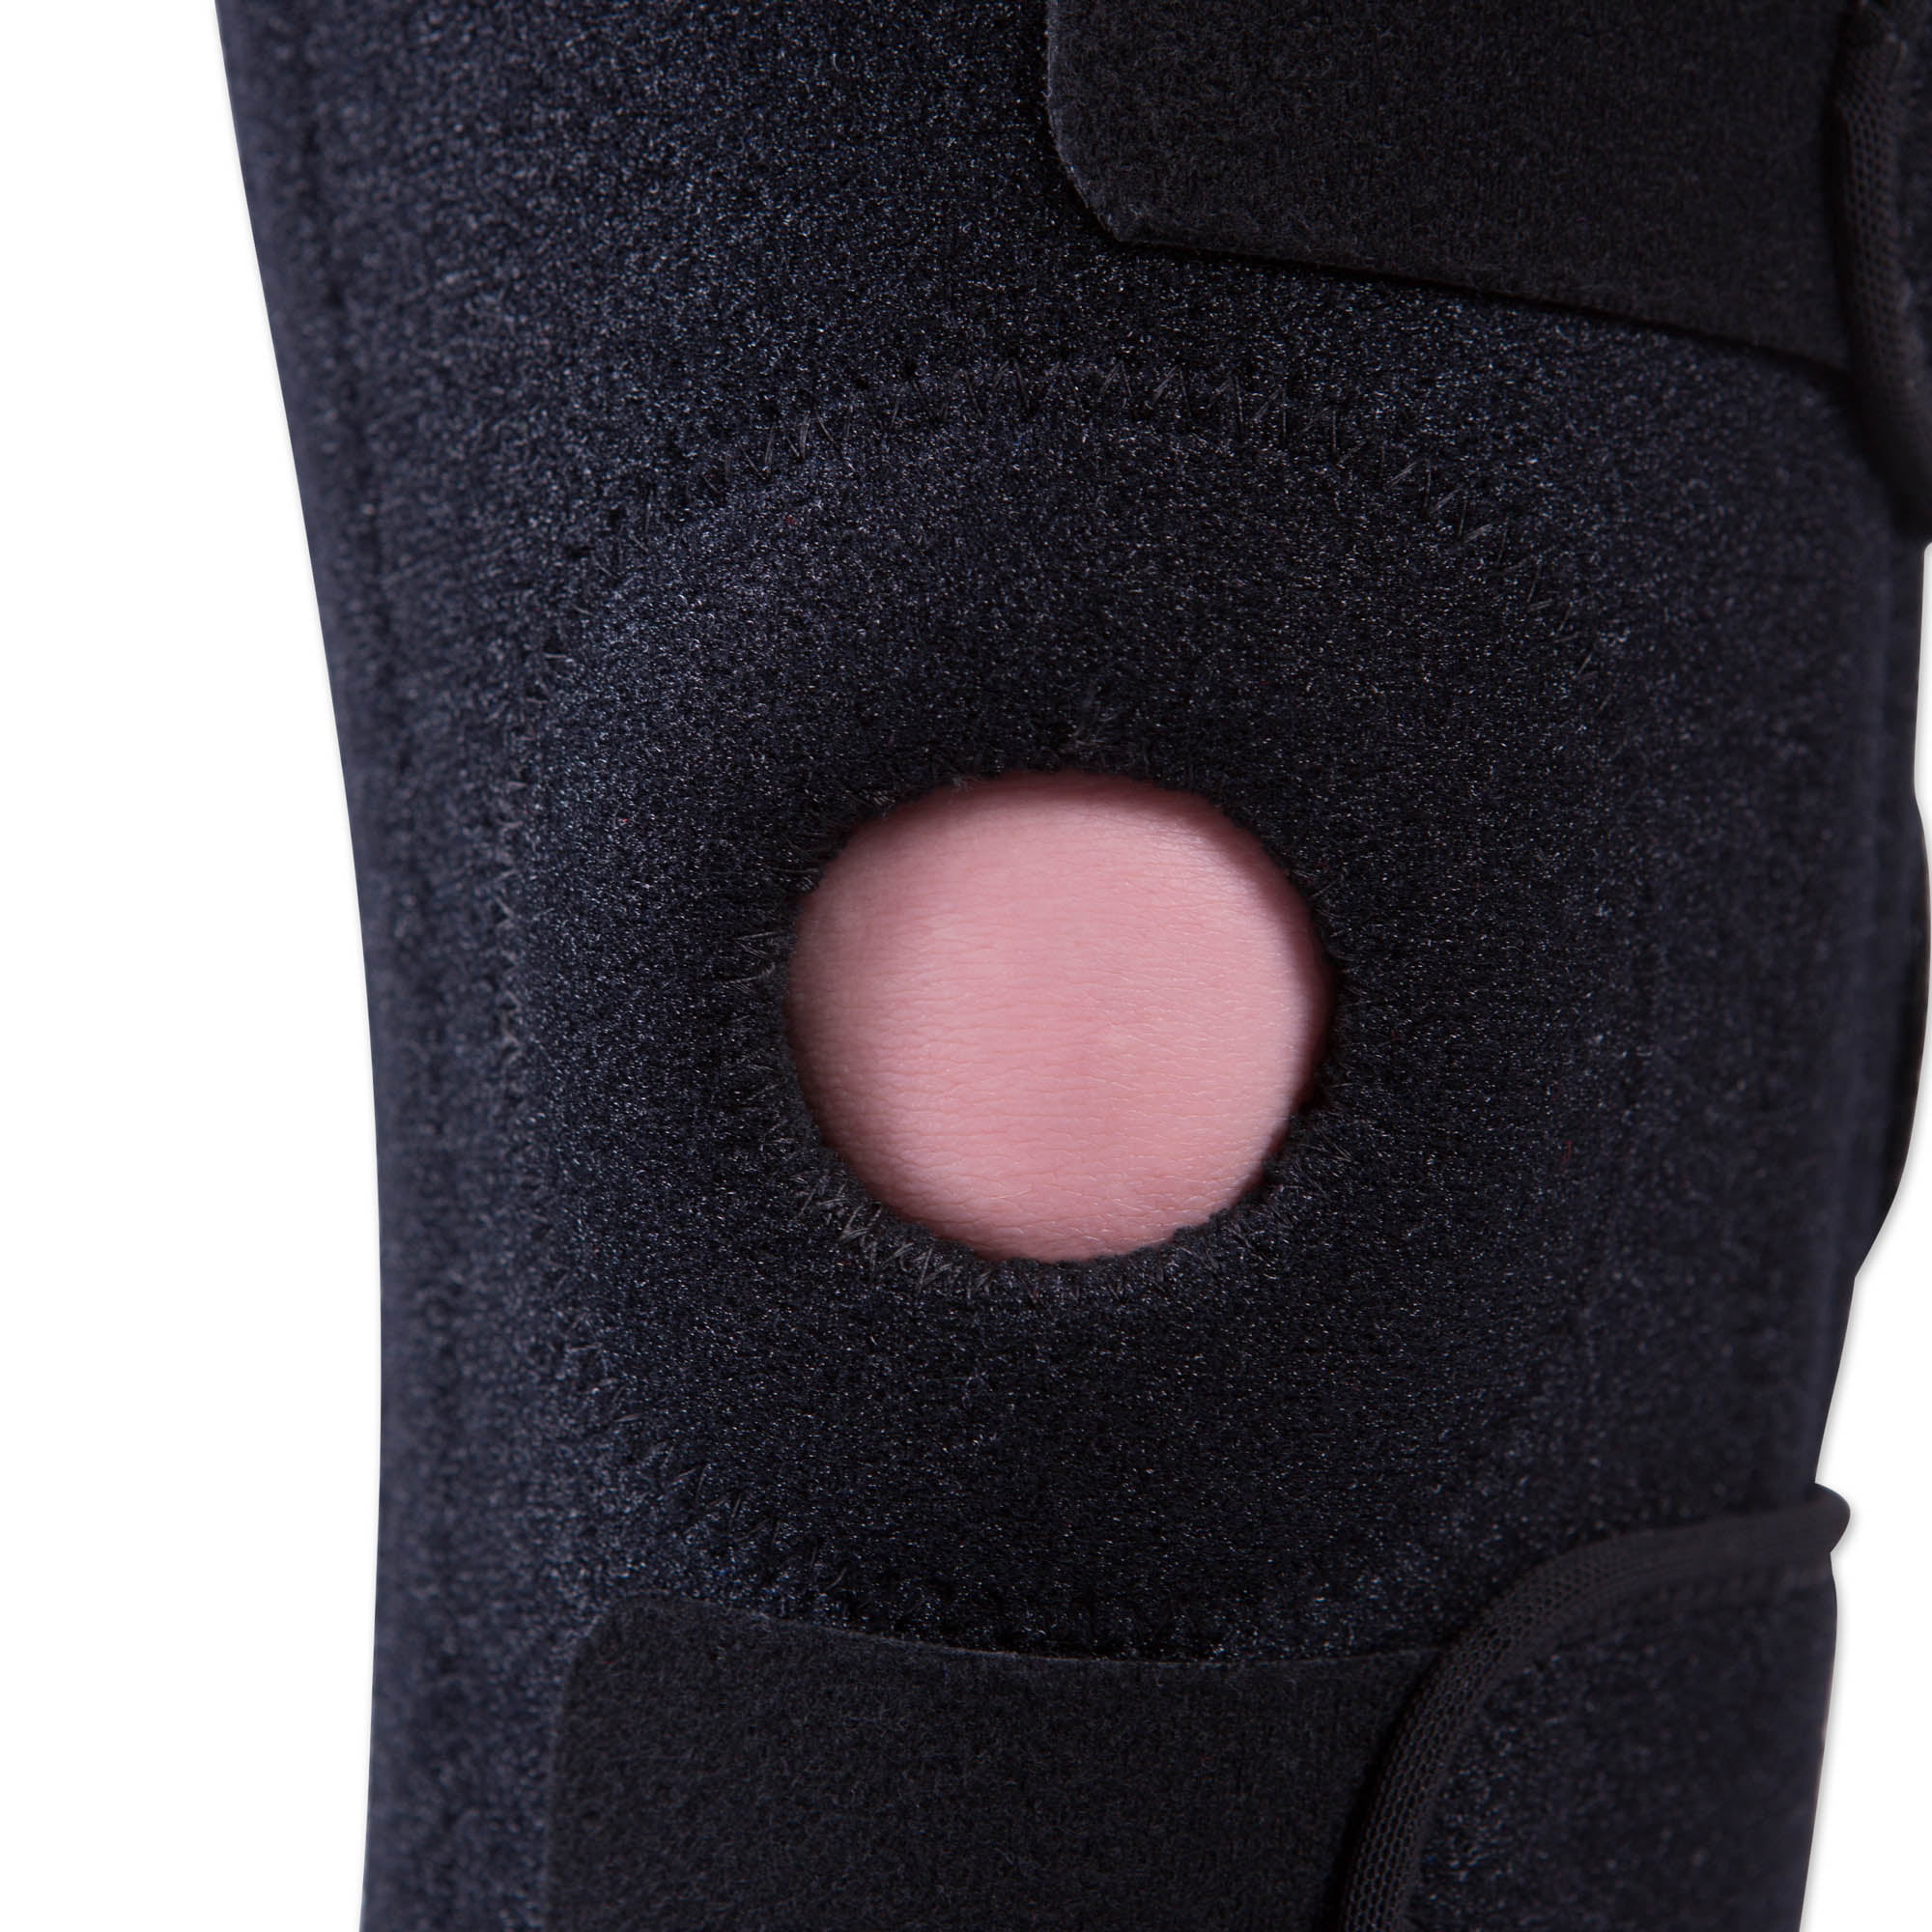 Athletec Sports Knee Support, Open-Patella Stabilizer with Adjustable  Strapping, Helps Relieve ACL, LCL, MCL, Meniscus Tear, Arthritis, and  Tendonitis Pain - Size Large in Black (One Piece) 